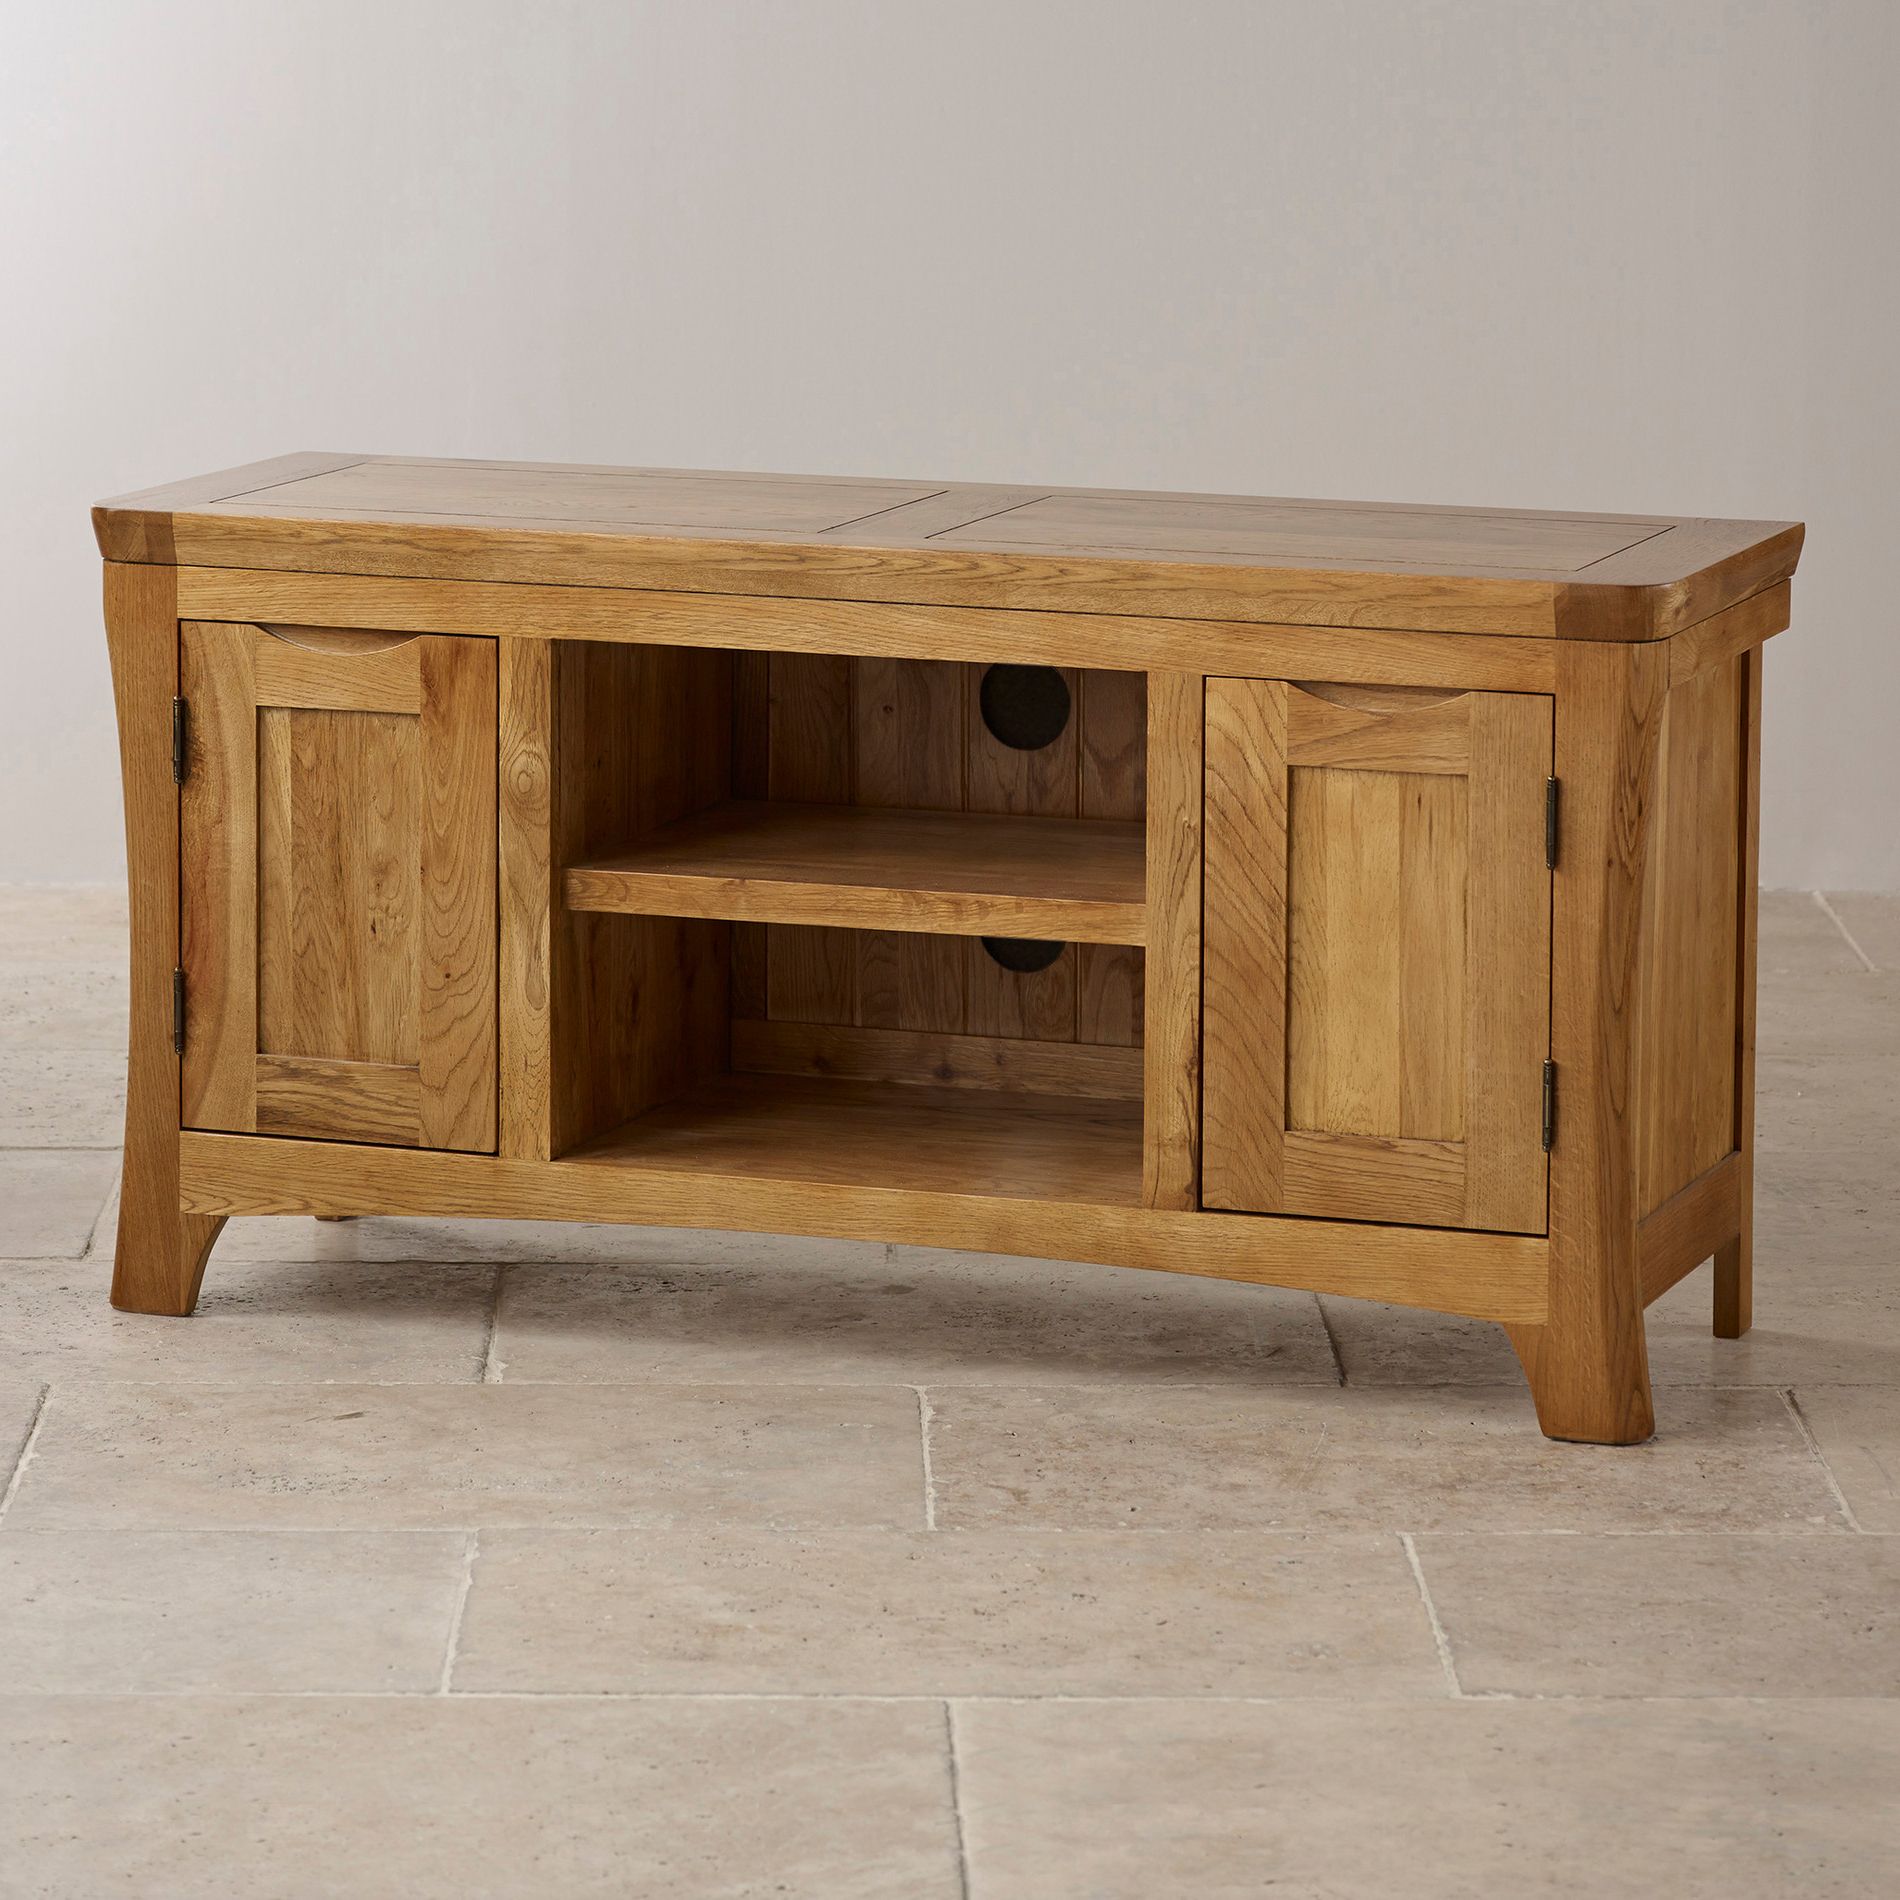 20 Ideas of Solid Oak Tv Stands